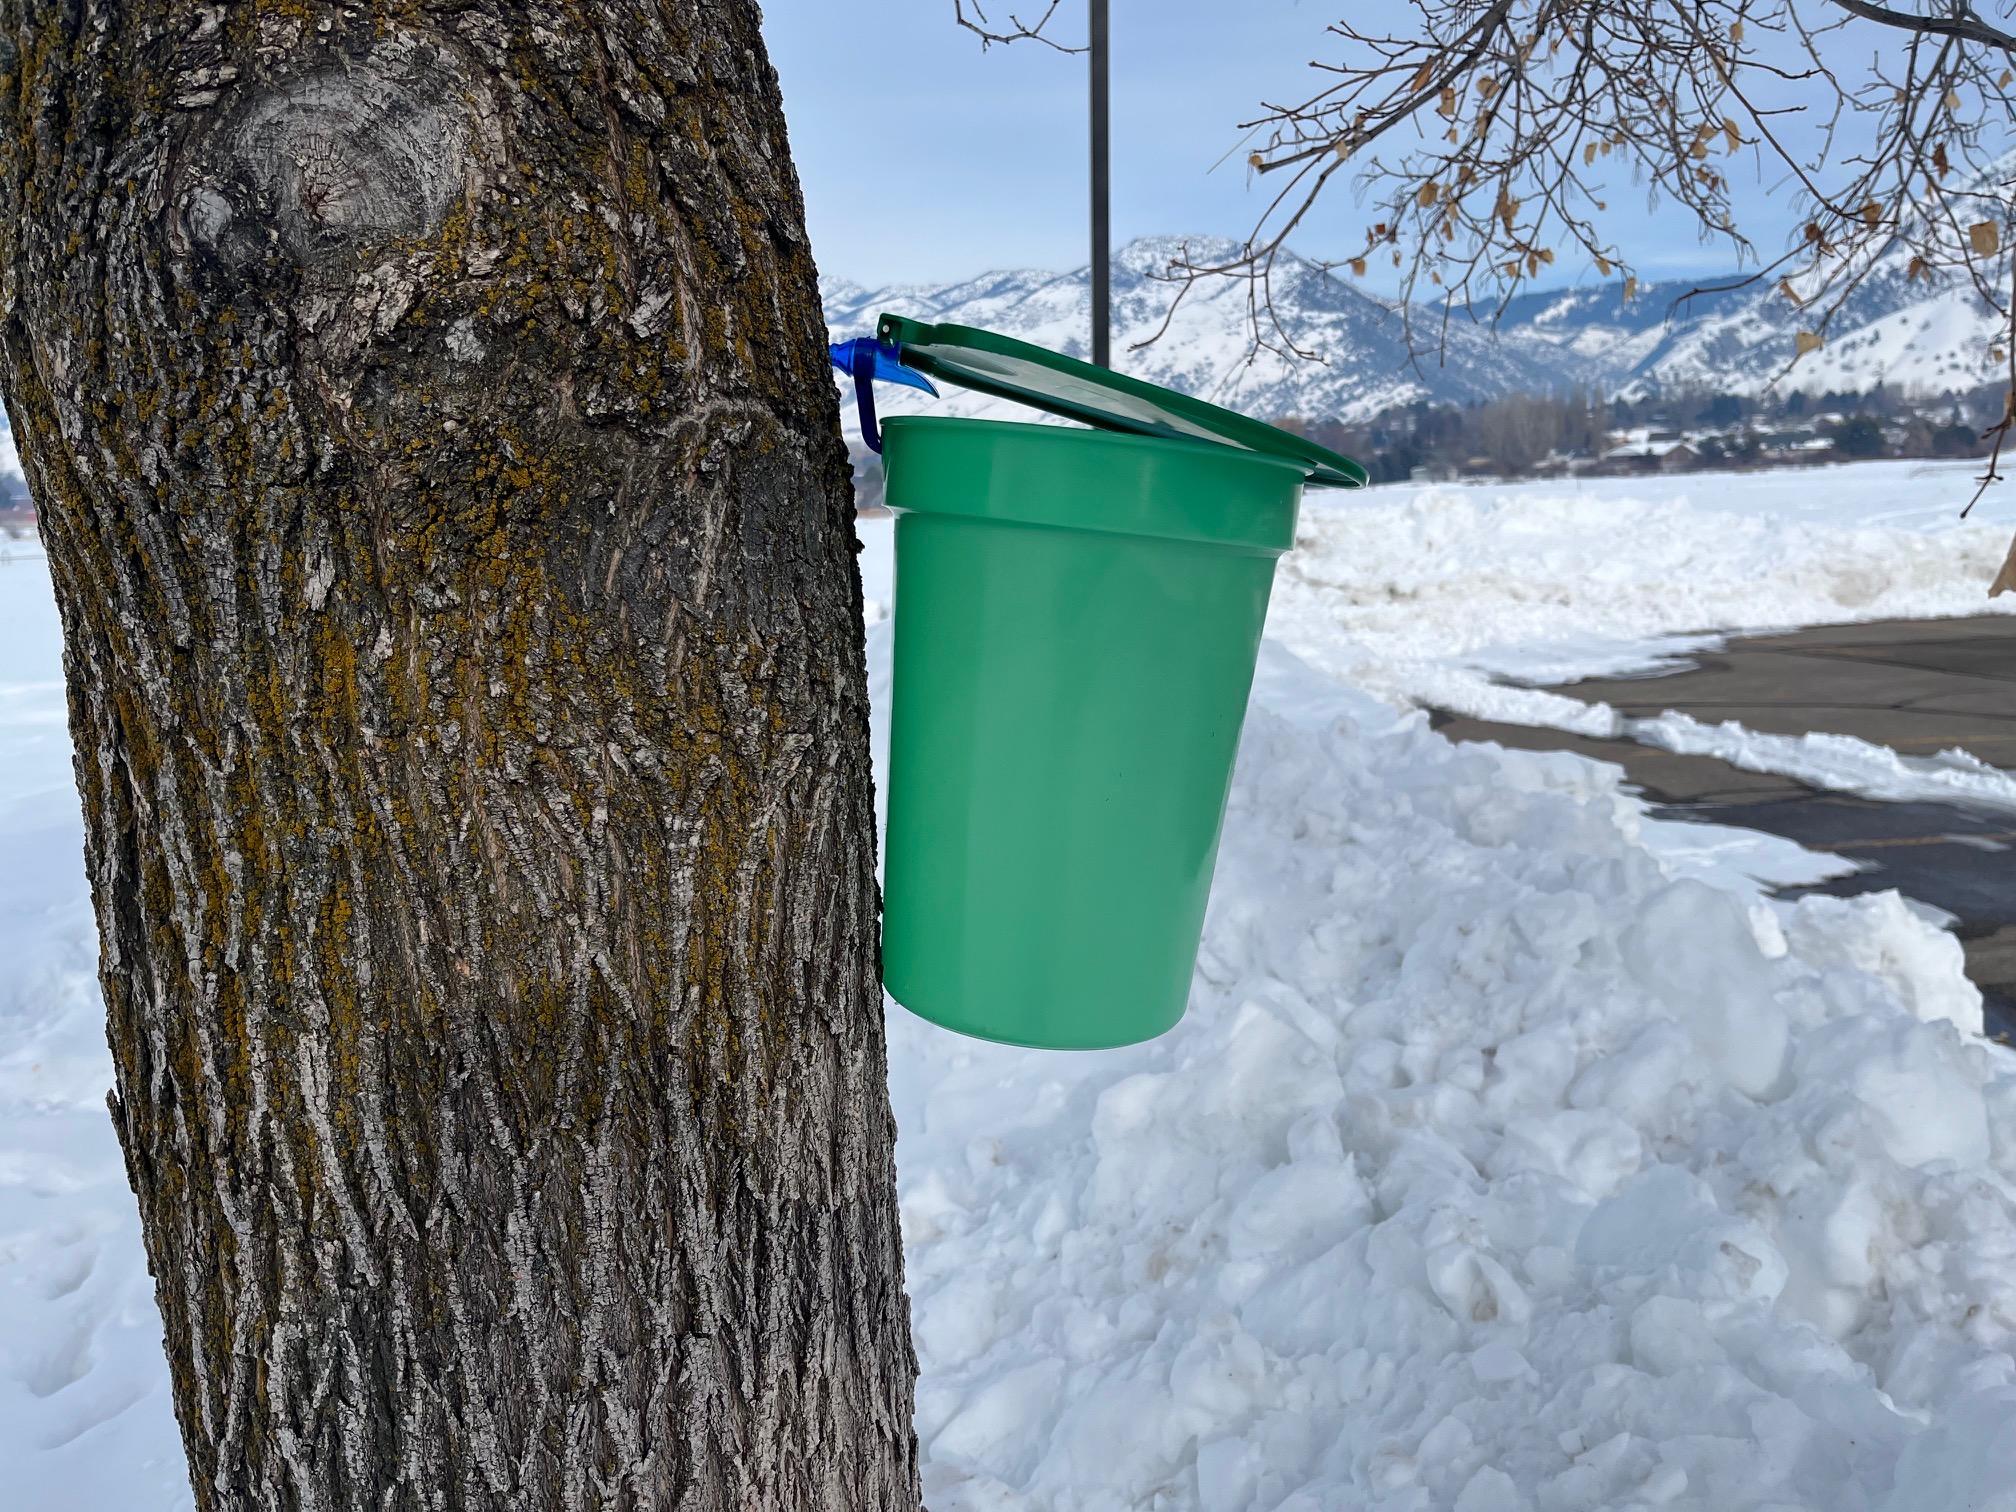 A green plastic bucket with a lid hangs on a tree